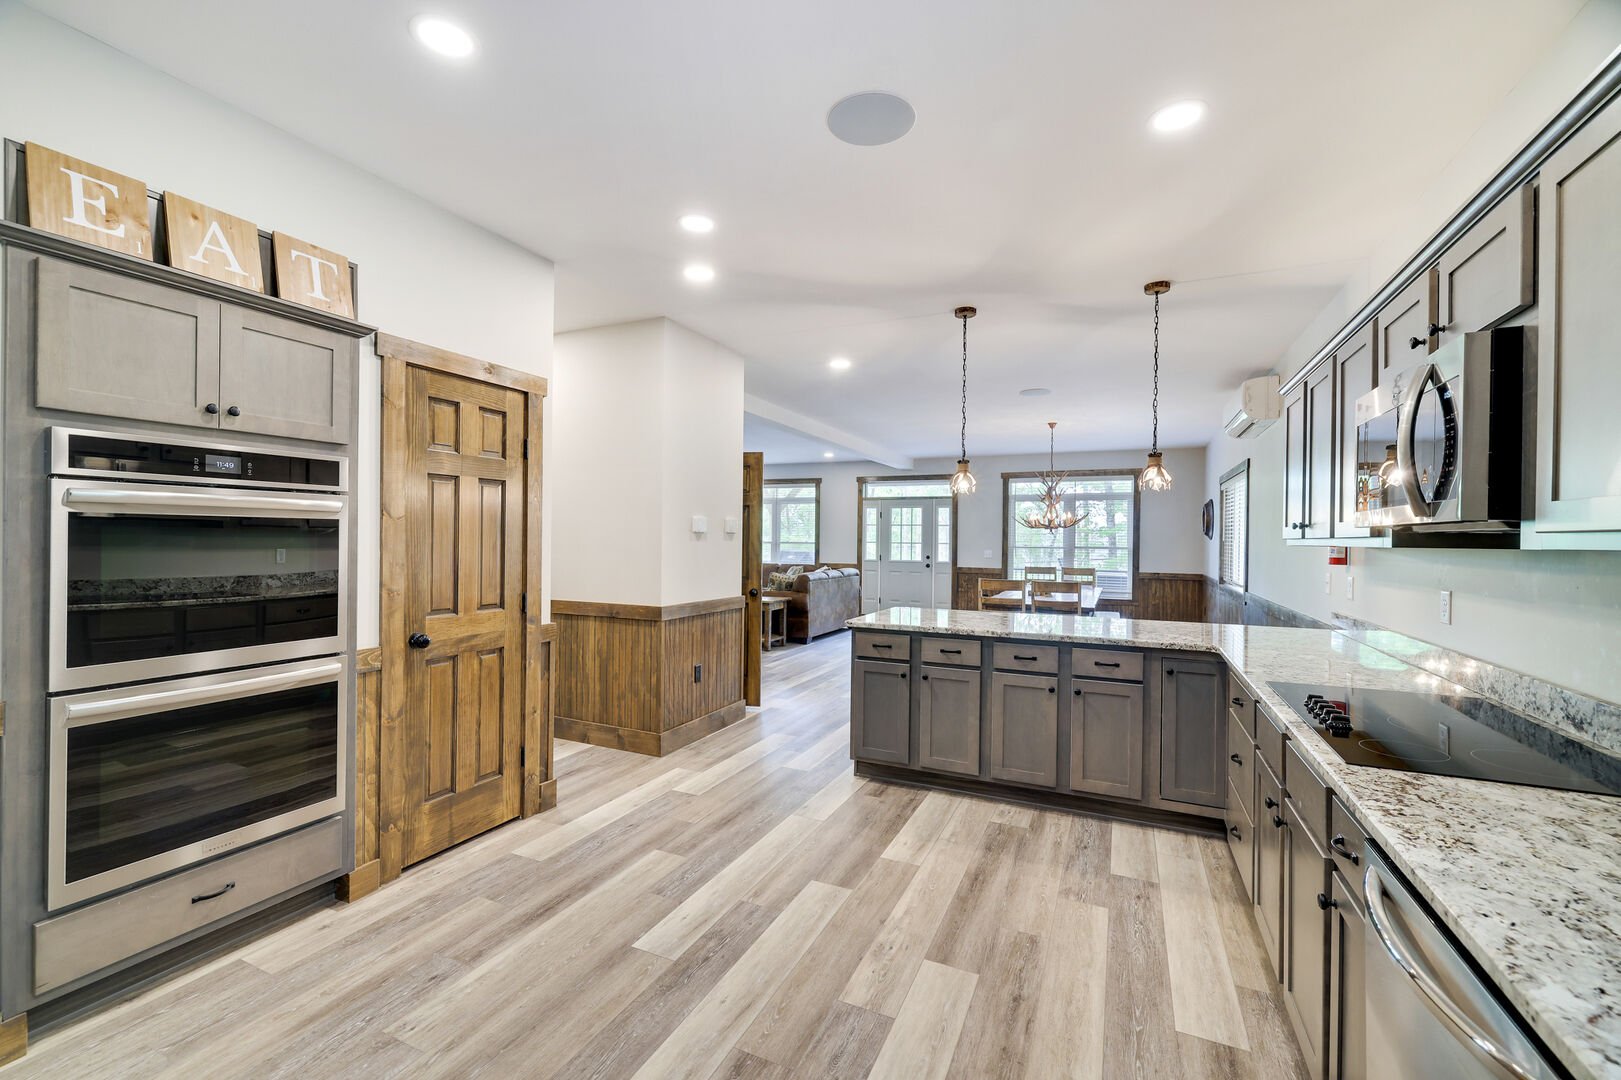 Join the Conversation!
You'll Be Able to Chat with Everyone While Cooking with this Open Concept Floor Plan.